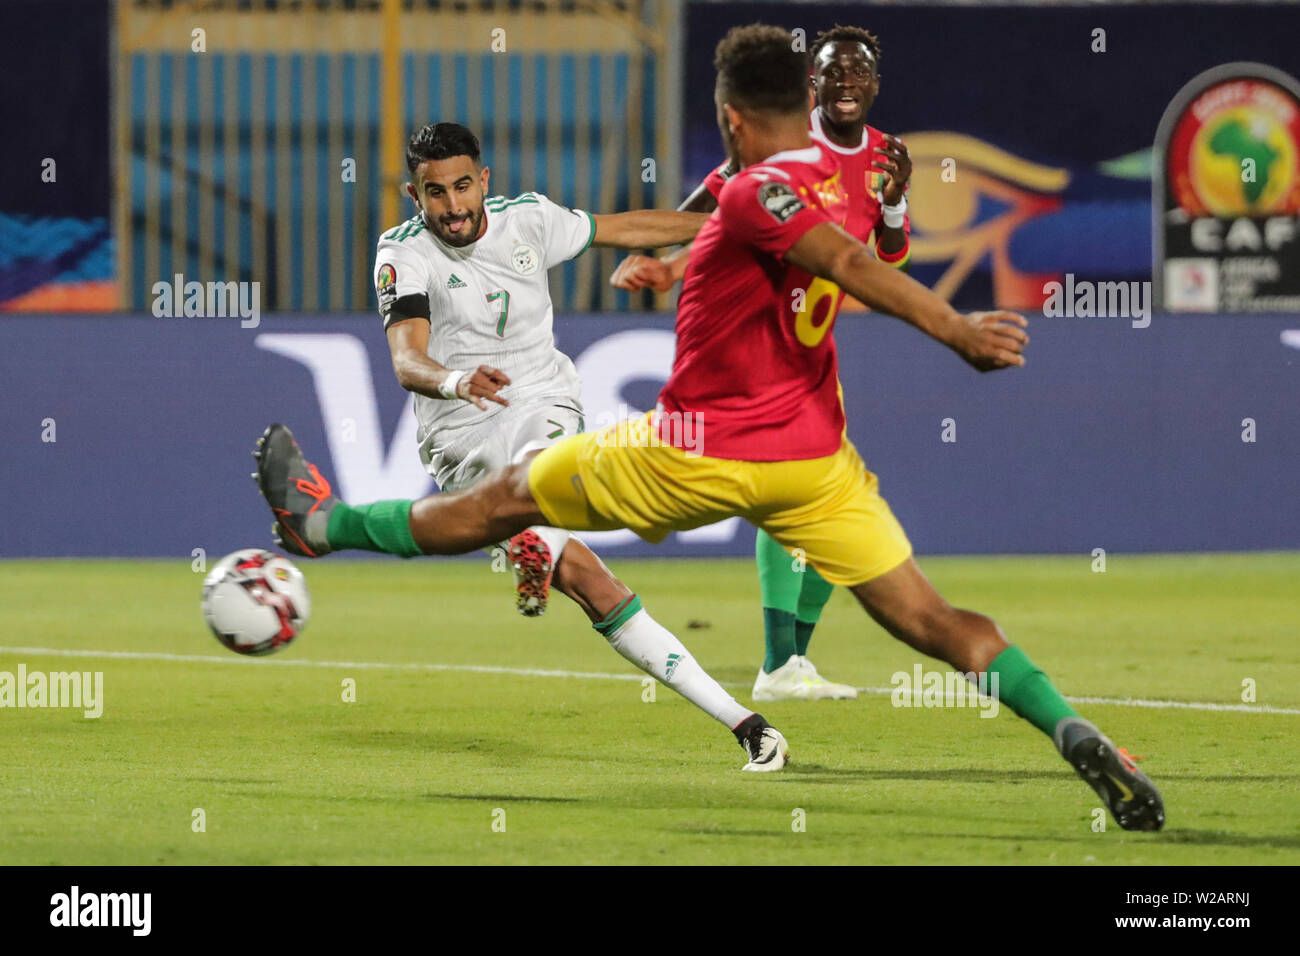 Cairo, Egypt. 07th July, 2019. Algeria's Riyad Mahrez scores during the 2019 Africa Cup of Nations round of 16 soccer match between Algeria and Guinea at the 30 June Stadium. Credit: Gehad Hamdy/dpa/Alamy Live News Stock Photo